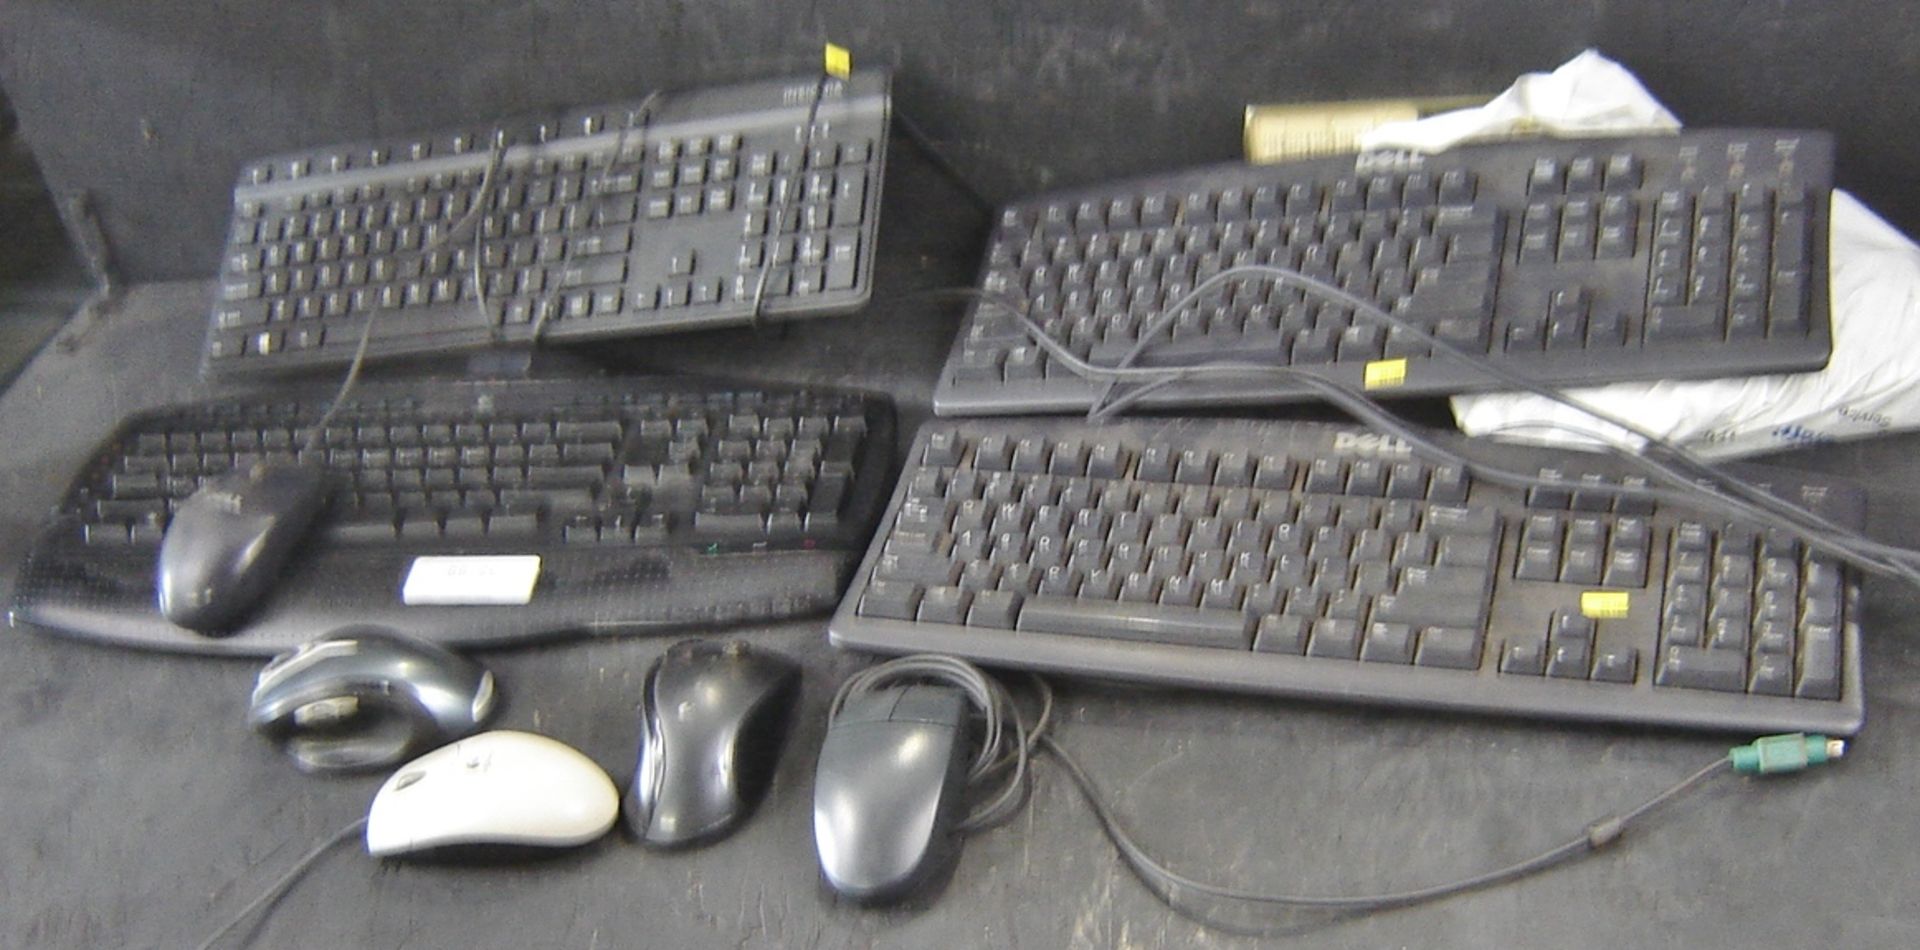 COMPUTER KEYBOARDS & MICE - Image 2 of 5